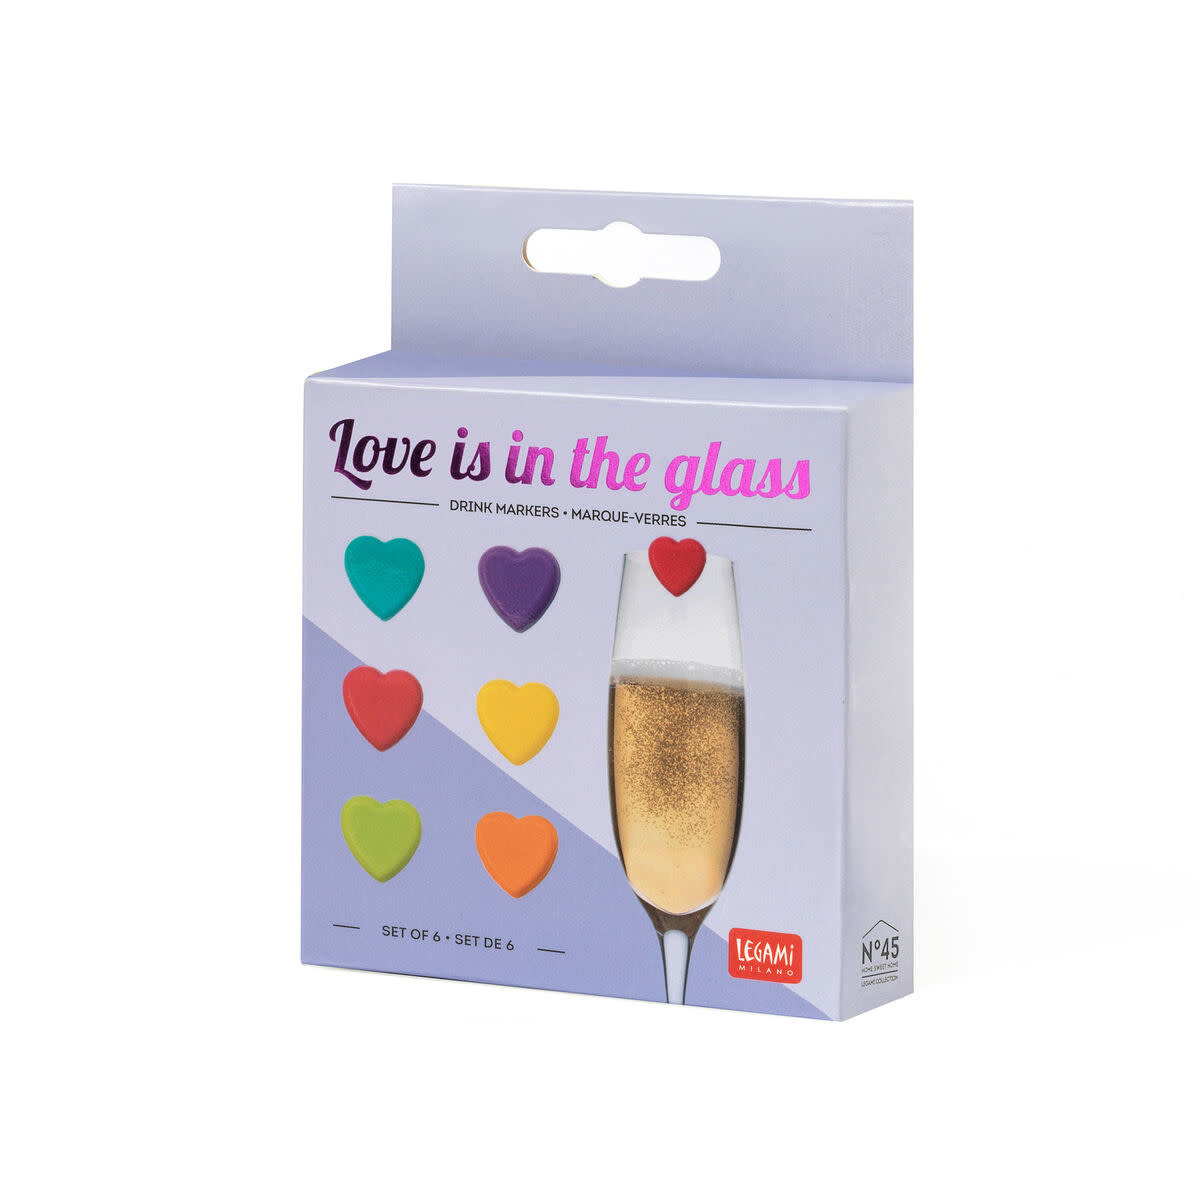 Legami Drink markers - Love is in the glass